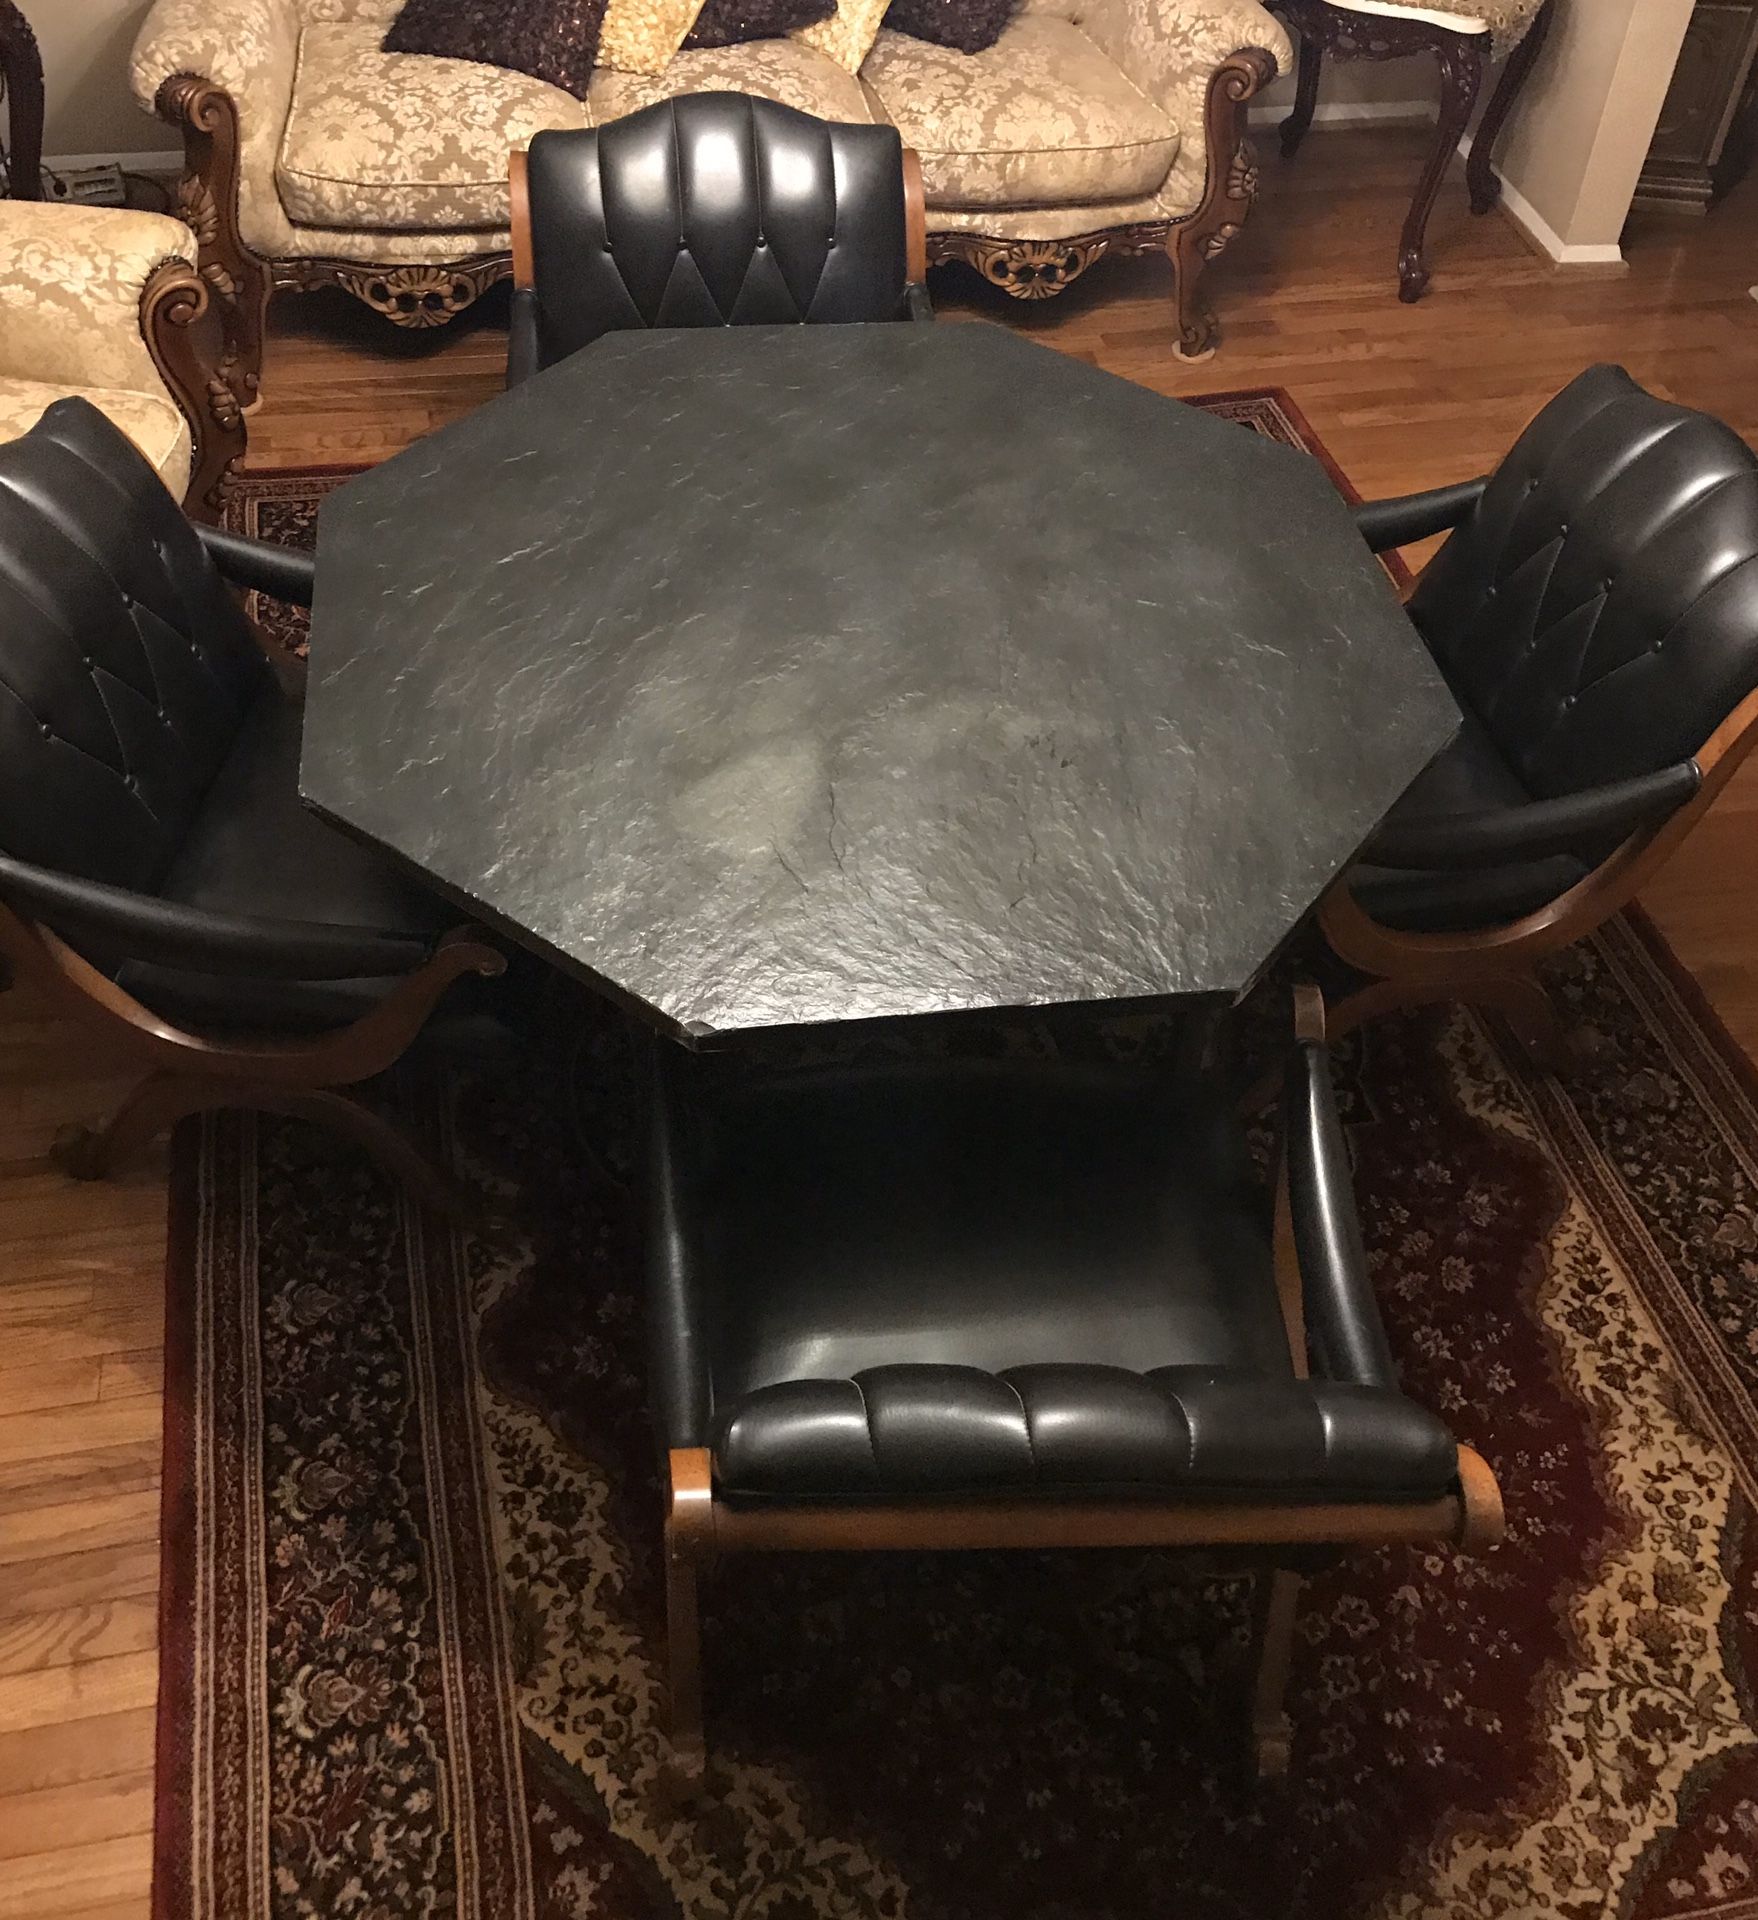 Vintage dining table heavy stone top 30”h50”L with 4 real leather chairs and free glass shelves available for pick up Asap